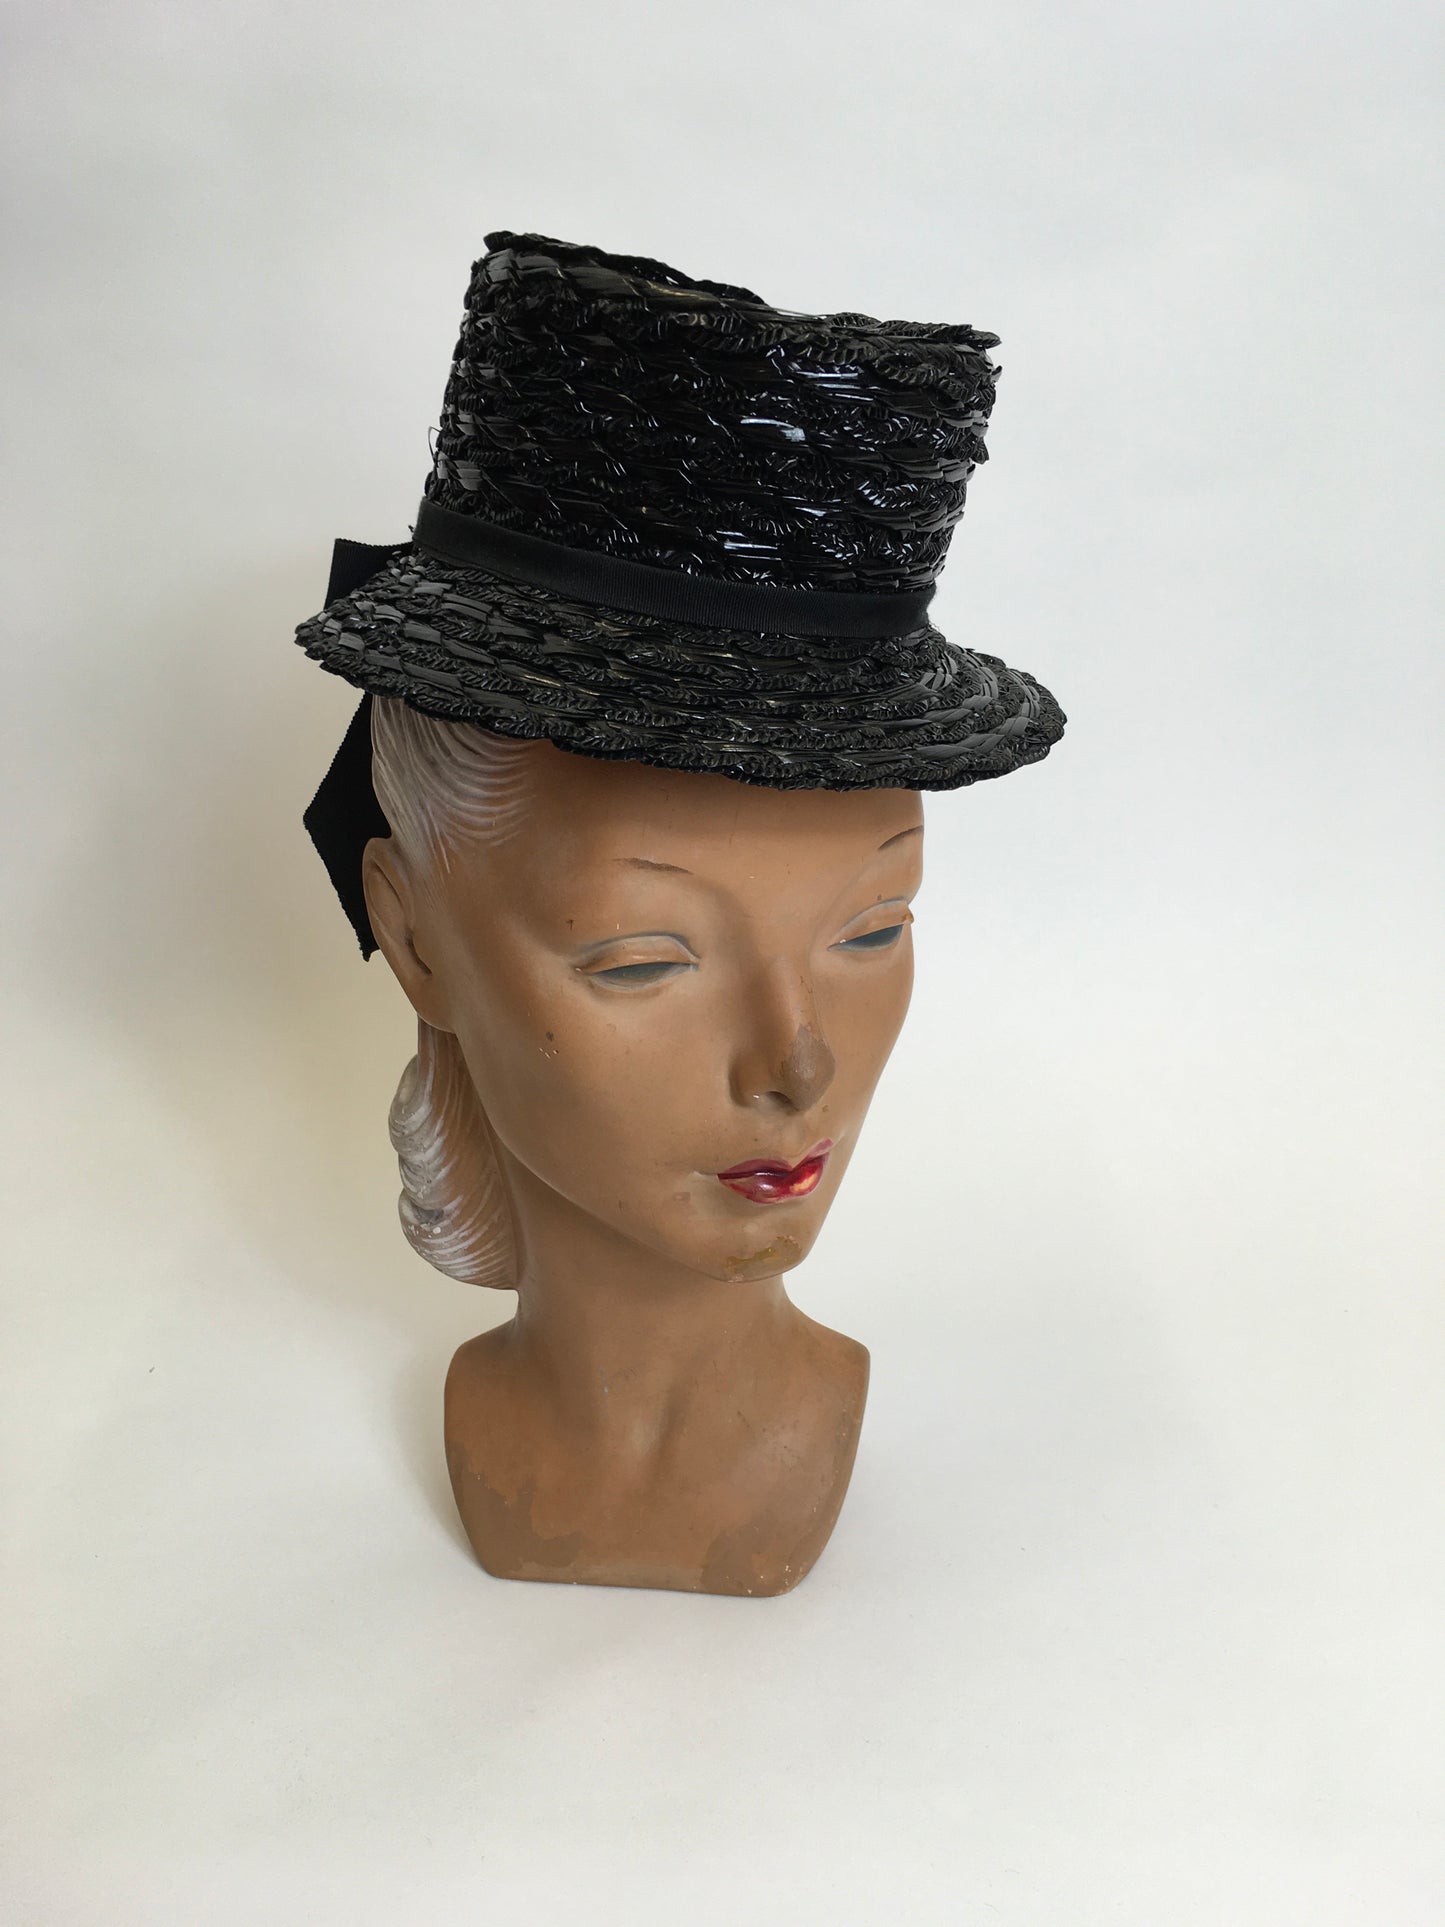 Original 1940’s Black American Topper Hat - Fabulous Iconic Shape With Grosgrain Bow